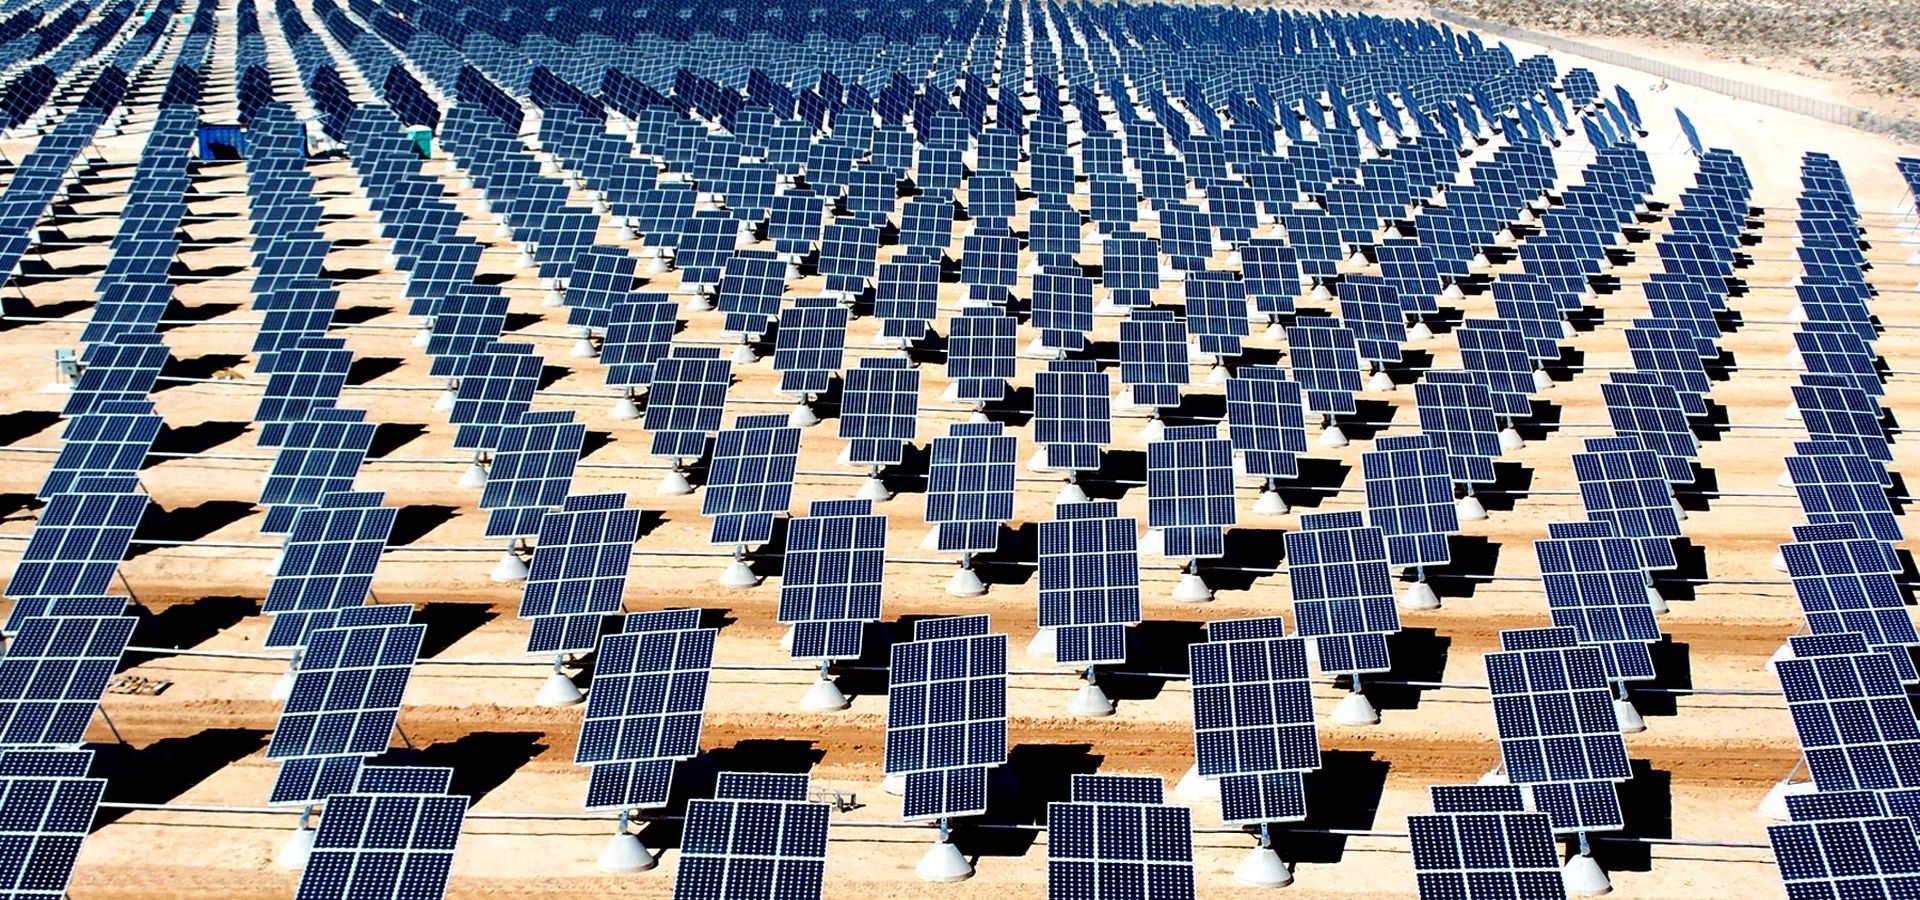 On 140 acres of unused land on Nellis Air Force Base, Nev., 70,000 solar panels are part of a solar photovoltaic array that will generate 15 megawatts of solar power for the base. (U.S. Air Force photo/Airman 1st Class Nadine Y. Barclay)